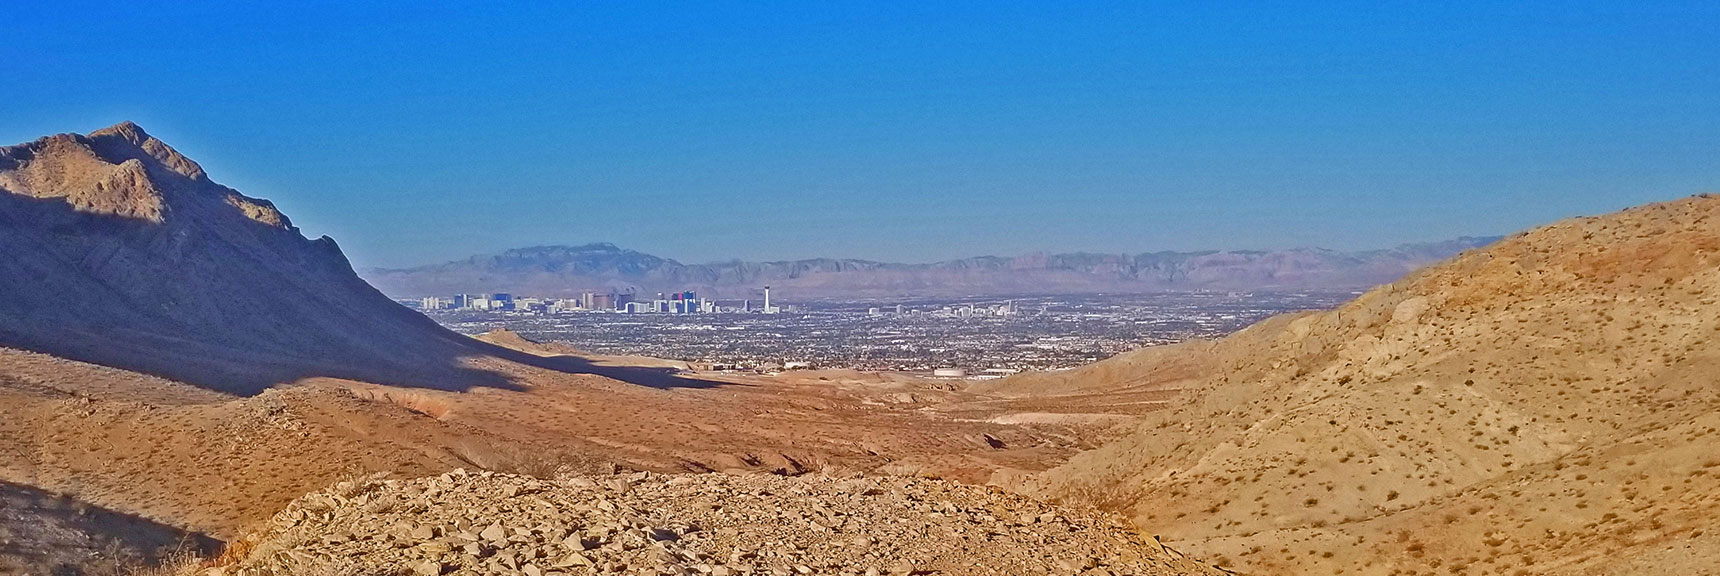 Larger View of Las Vegas Strip with Potosi Mt. and Rainbow Mts. in Background | Sunrise Mountain, Las Vegas, Nevada